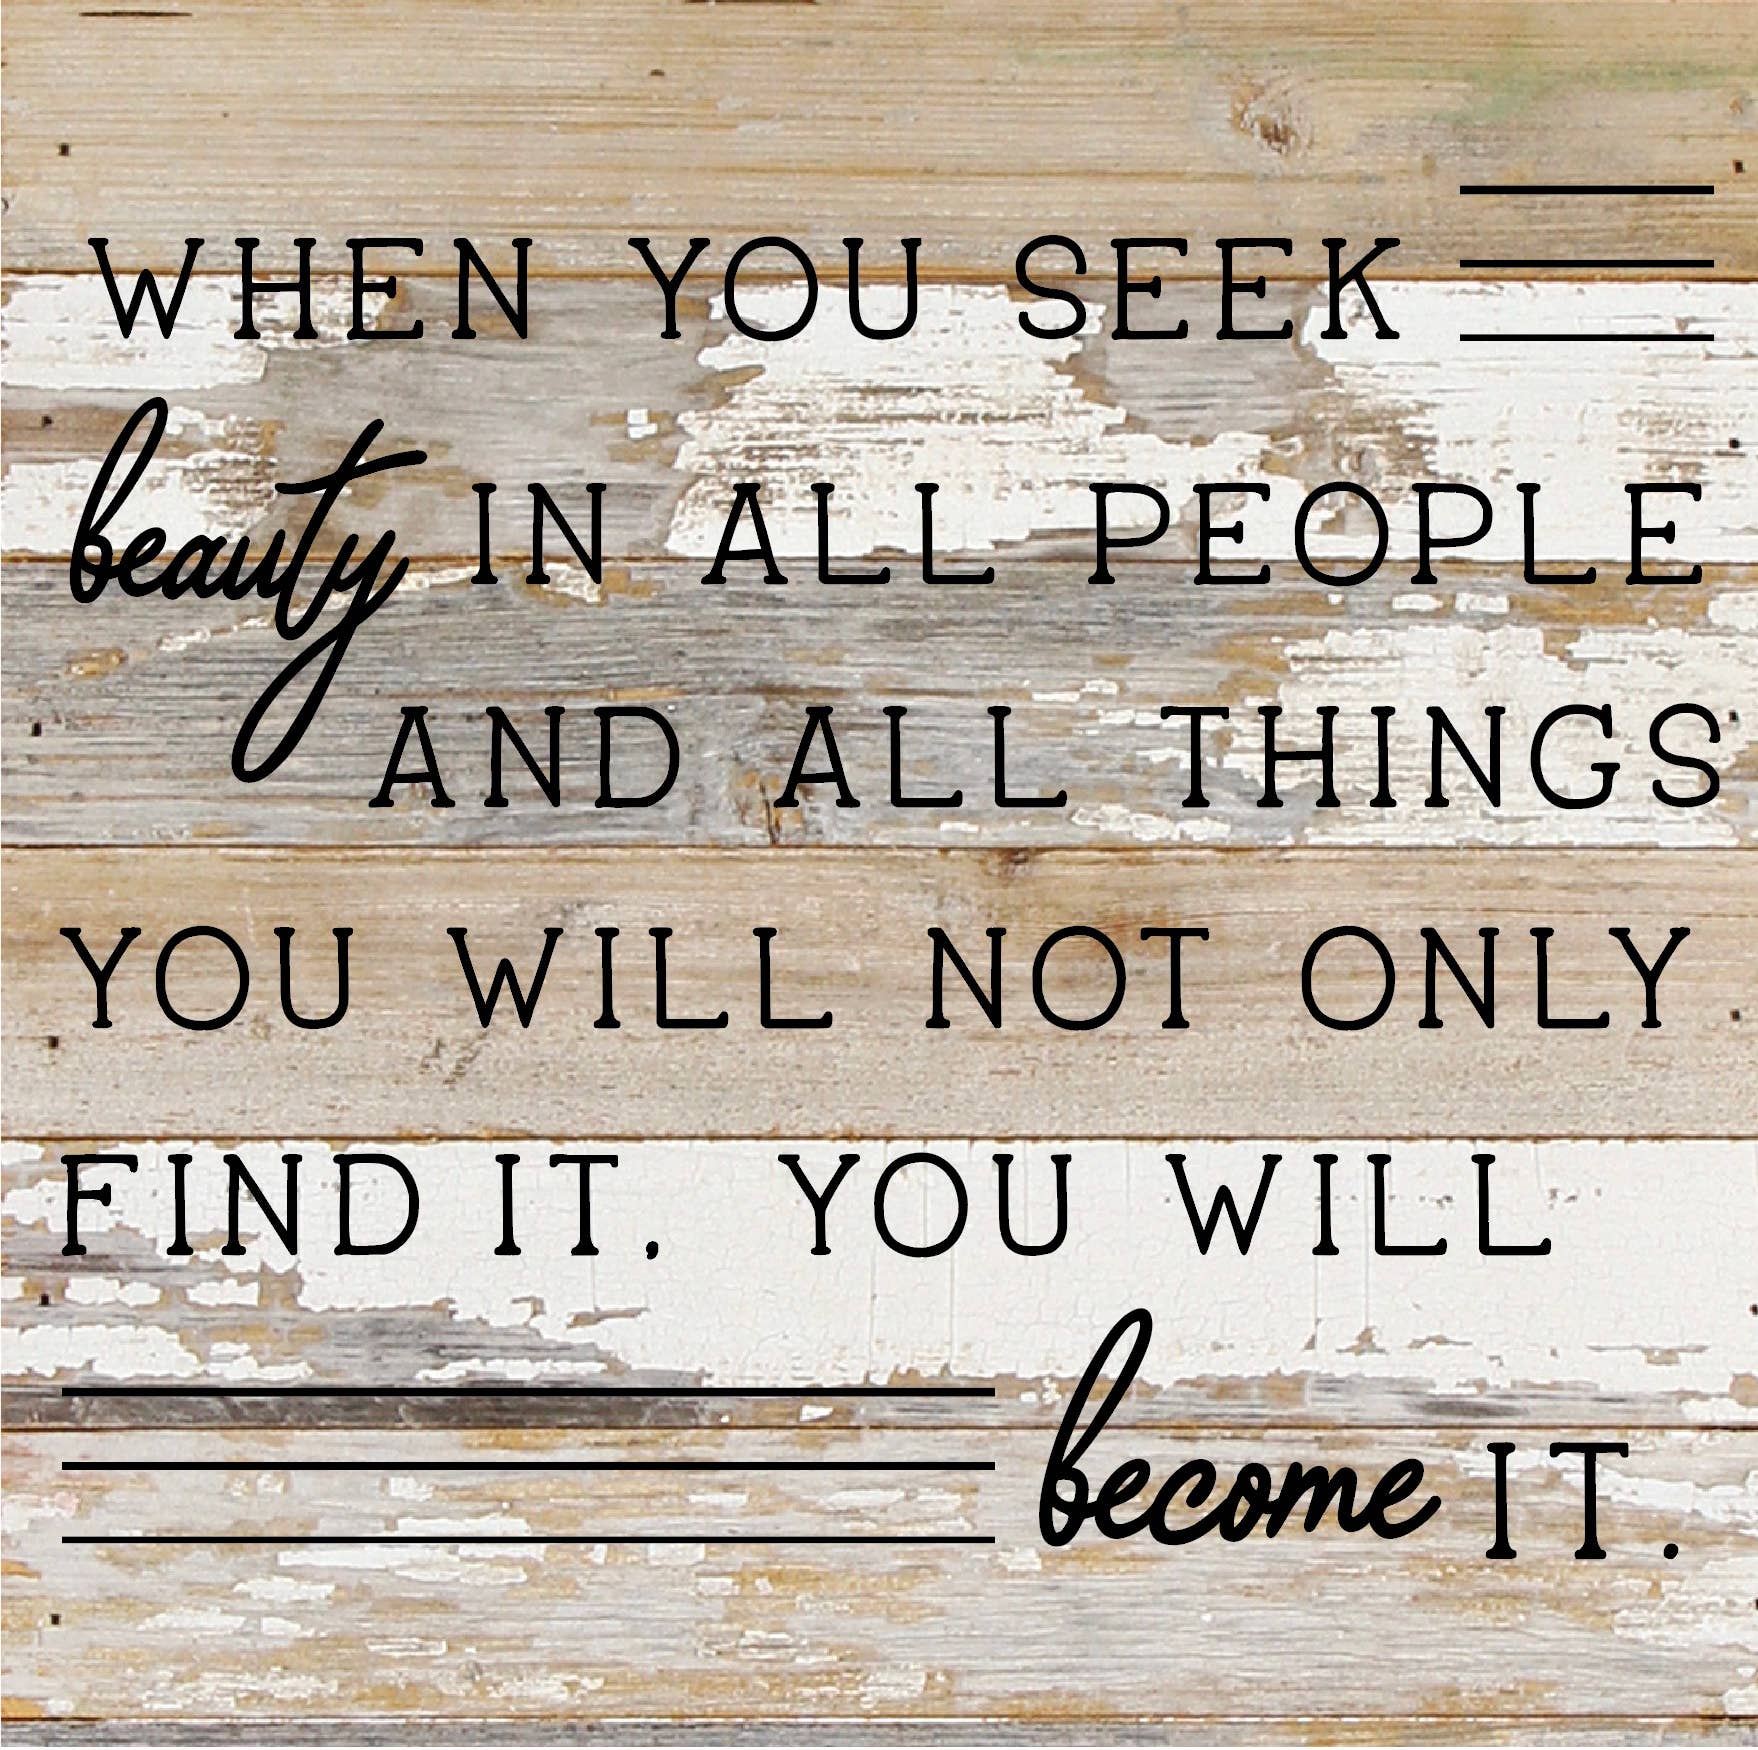 When you seek beauty in all people and all things you will not only find it you will become it / 10"X10" Reclaimed Wood Sign